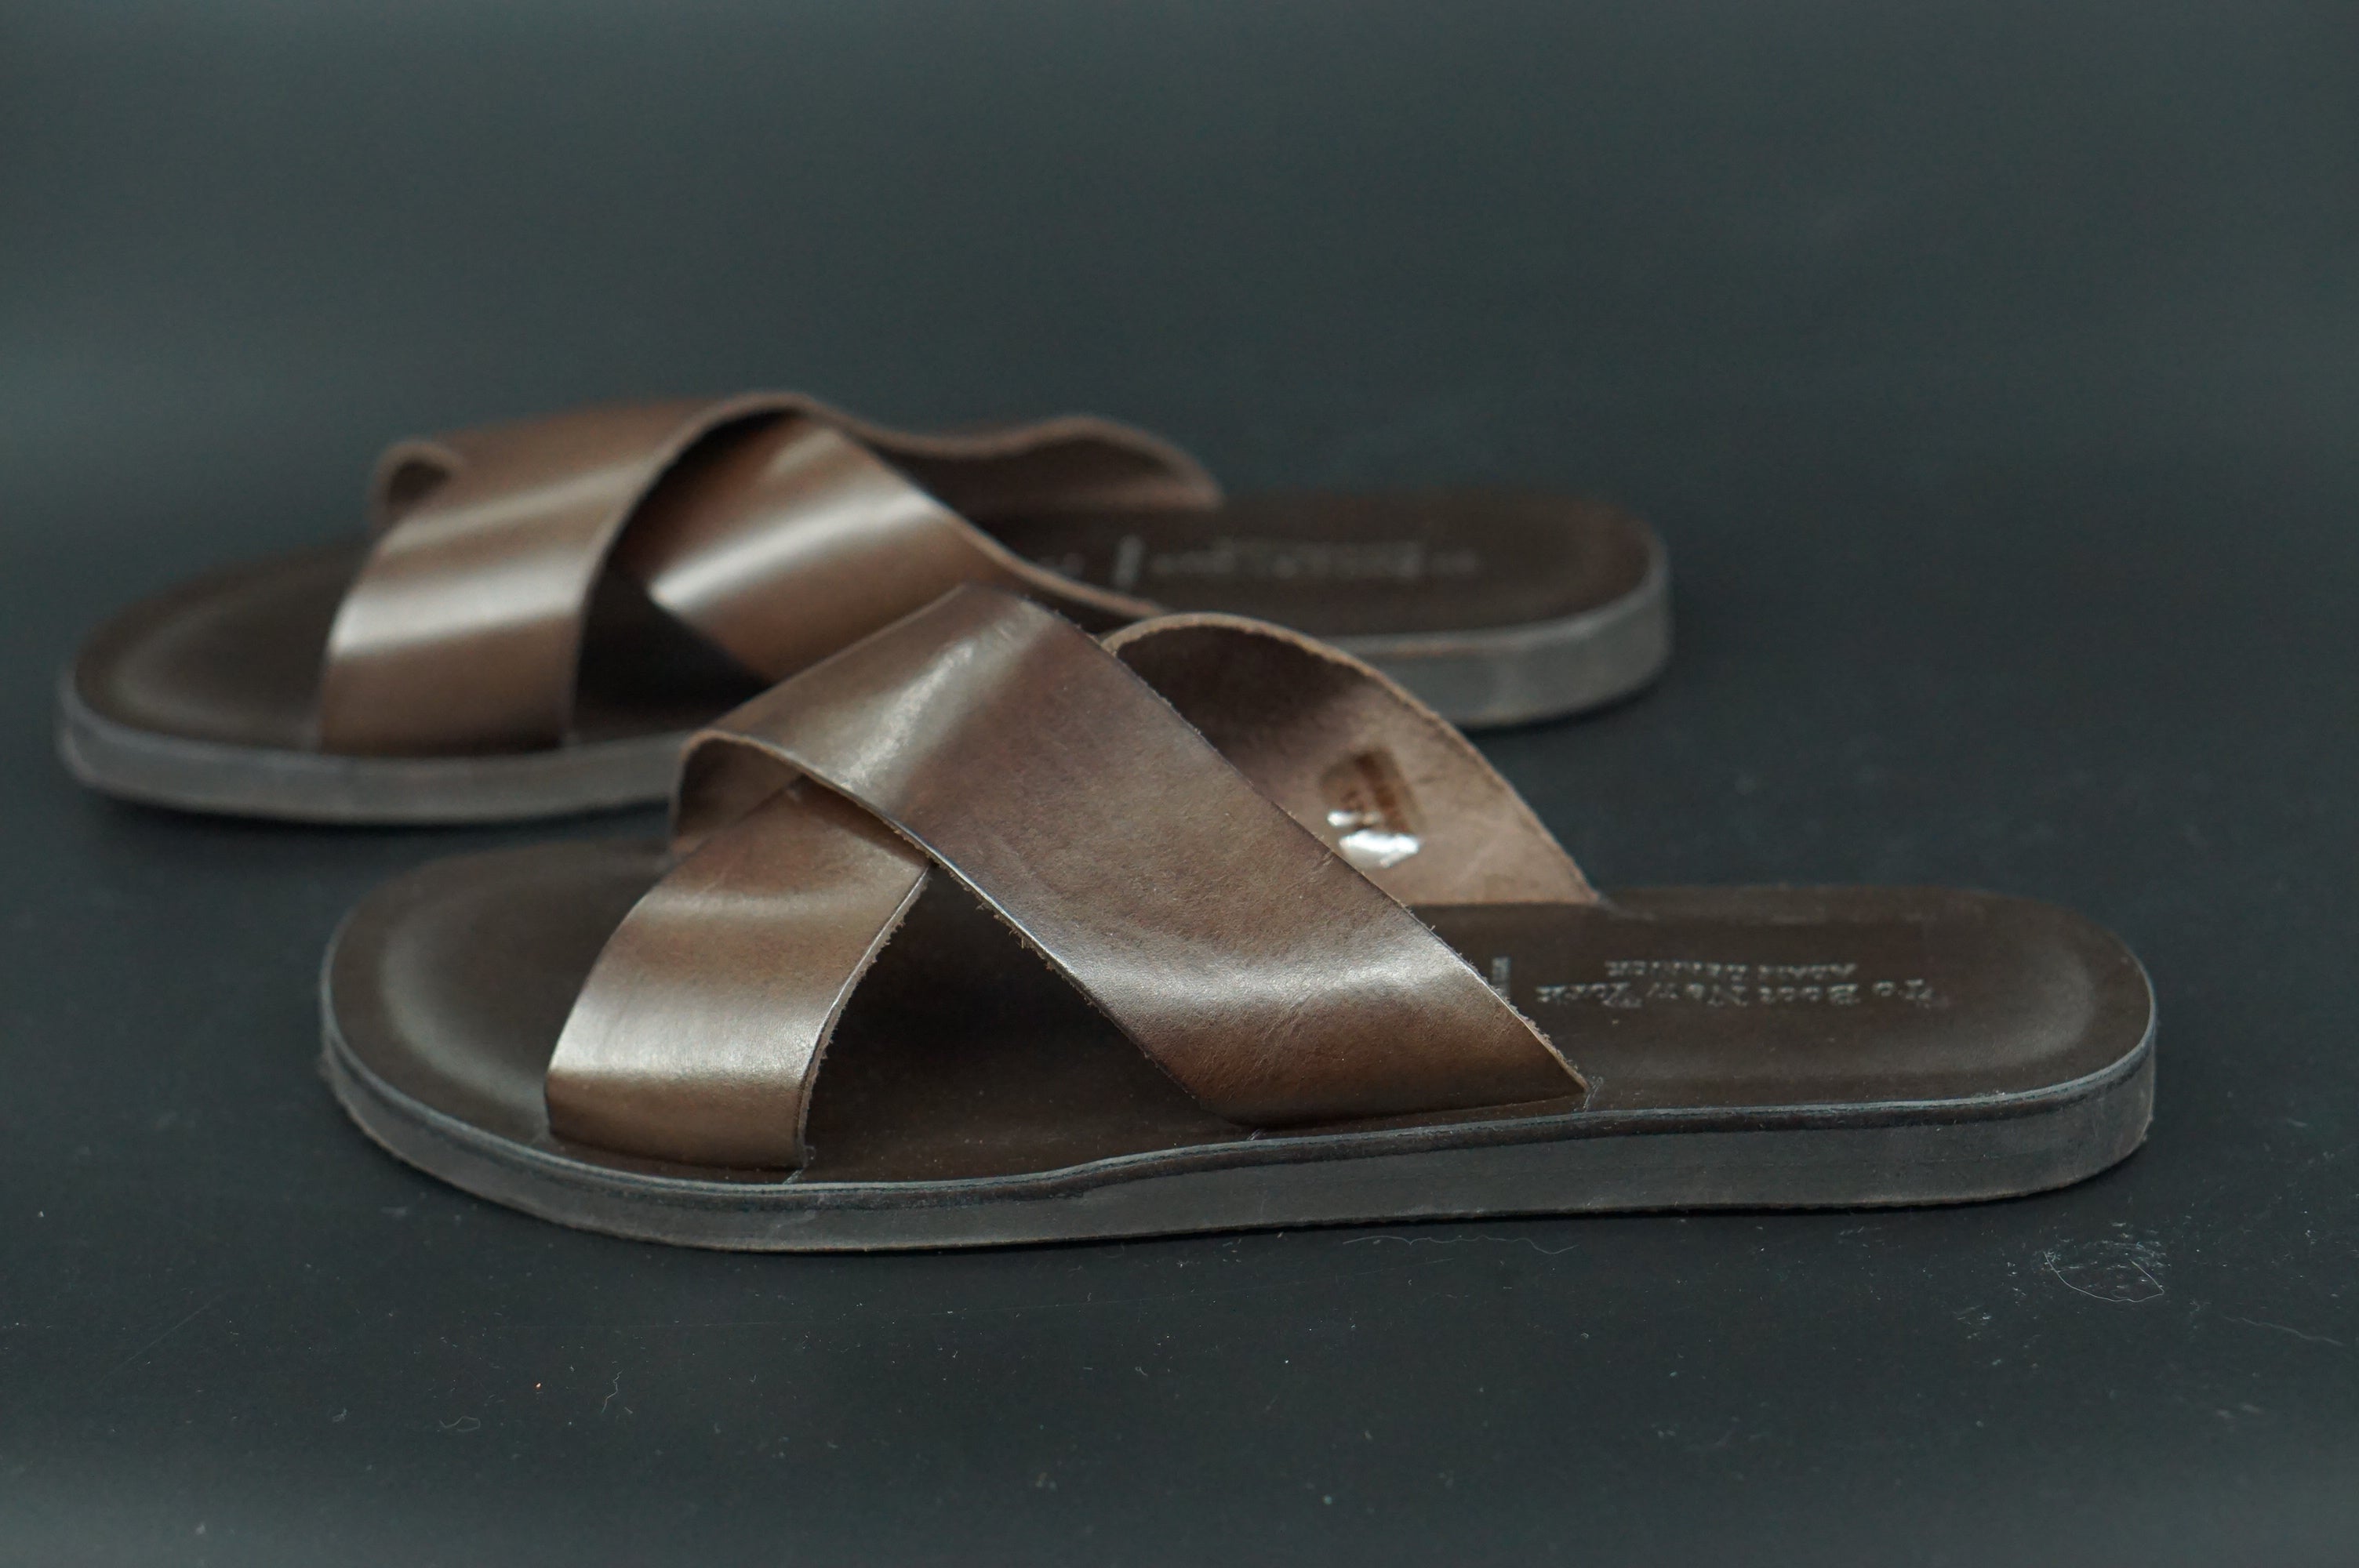 To Boot New York Brown Leather Miramare Flip Flop Men Sandals Size 12 $225 Flat